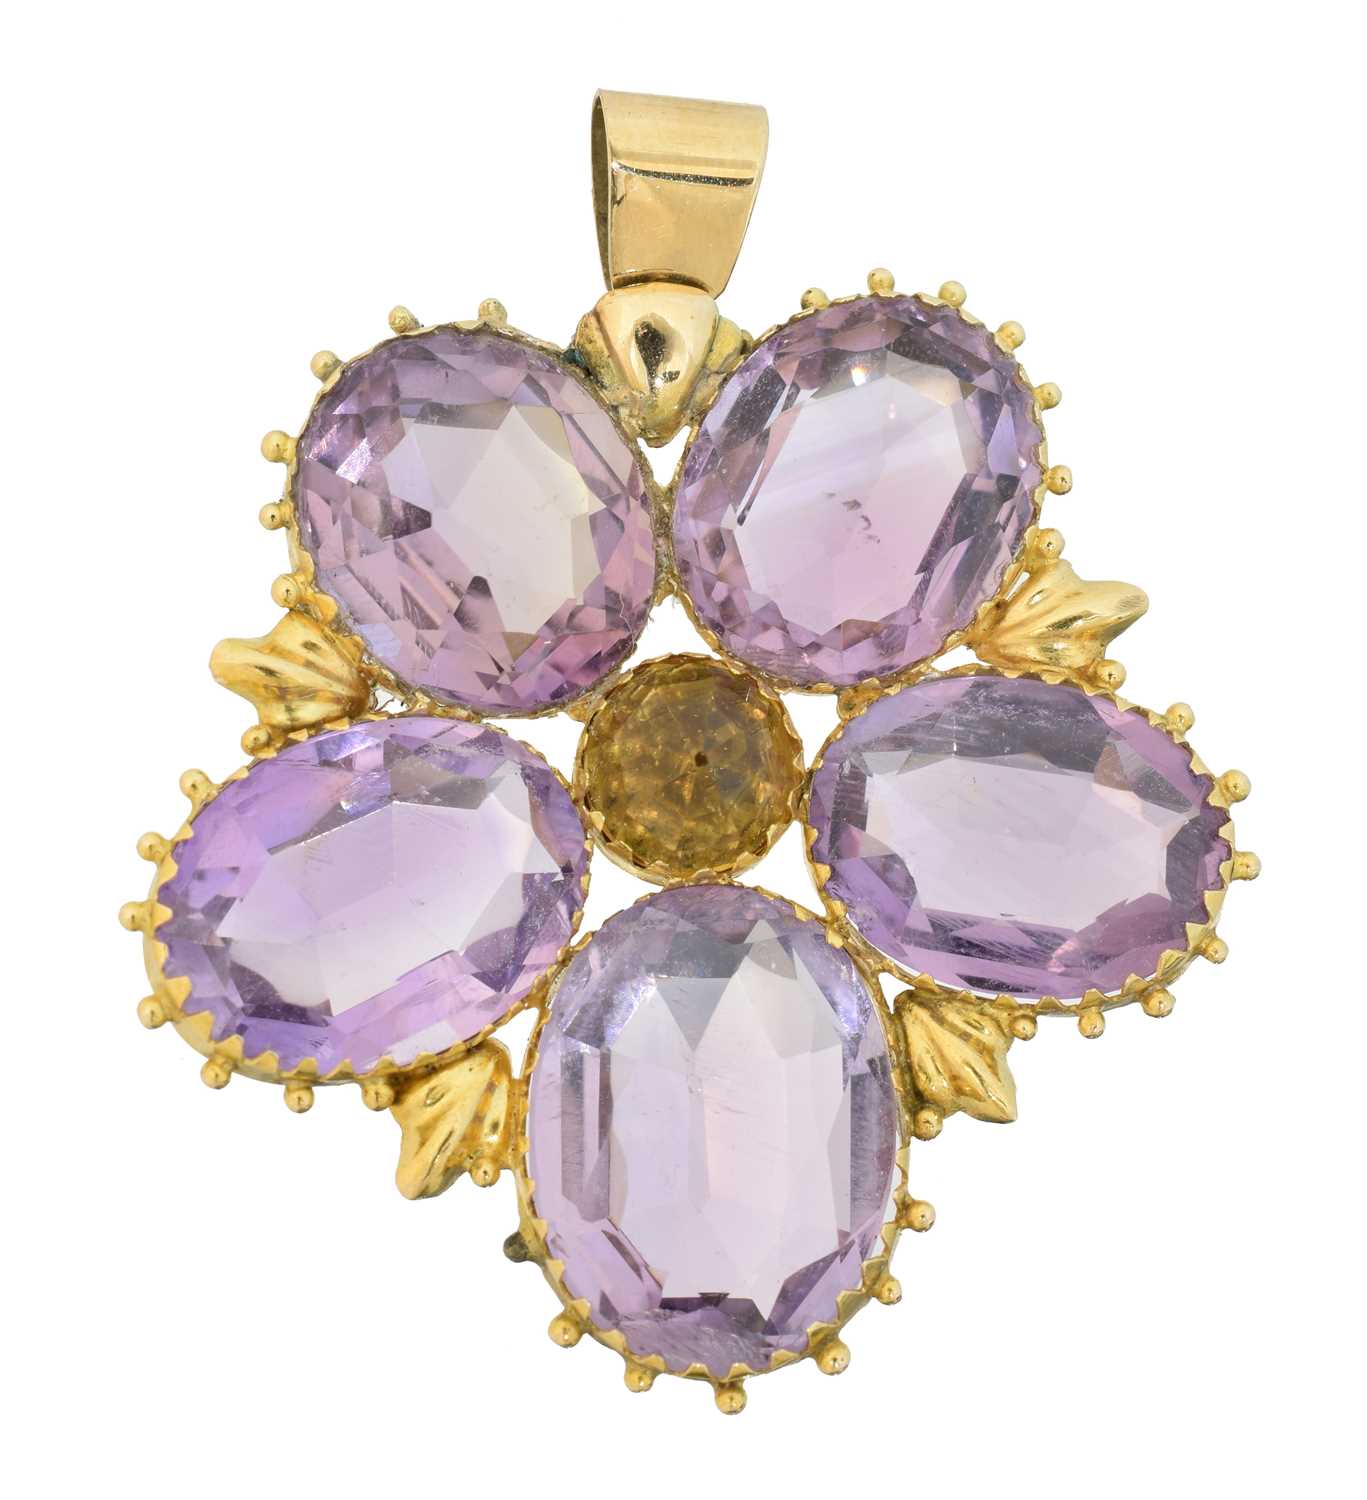 Lot 63 - An amethyst and citrine pendant